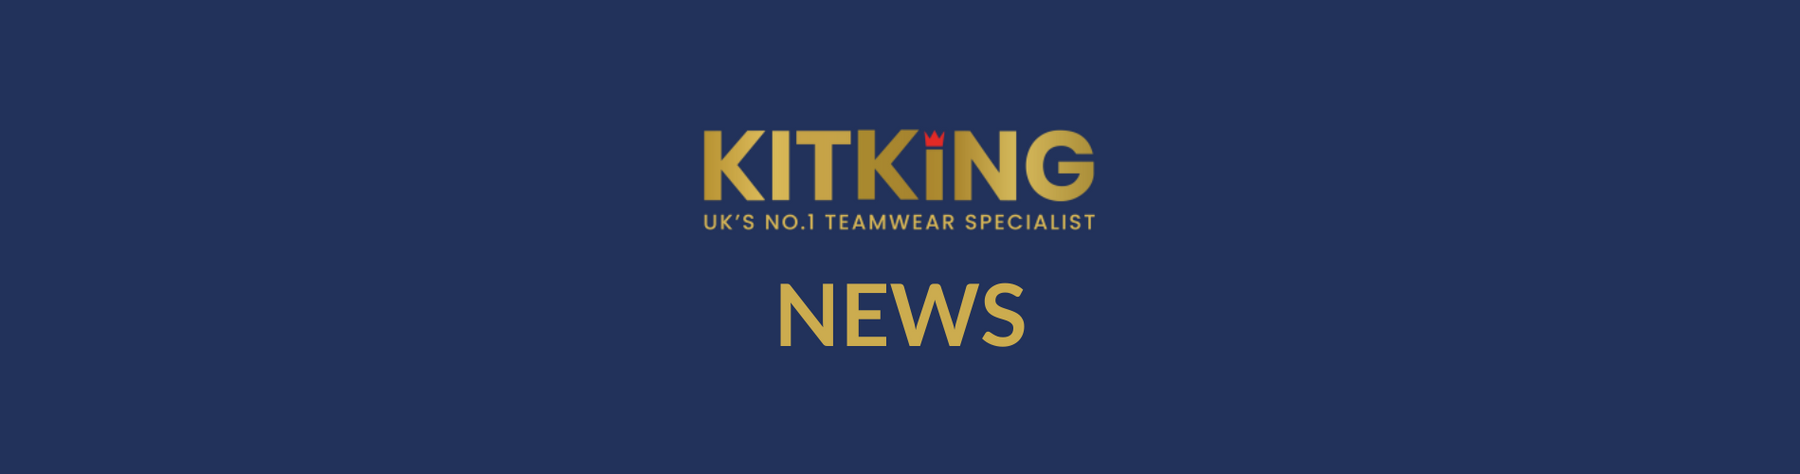 Kitking teams up with Leicester Riders for Retro Night!